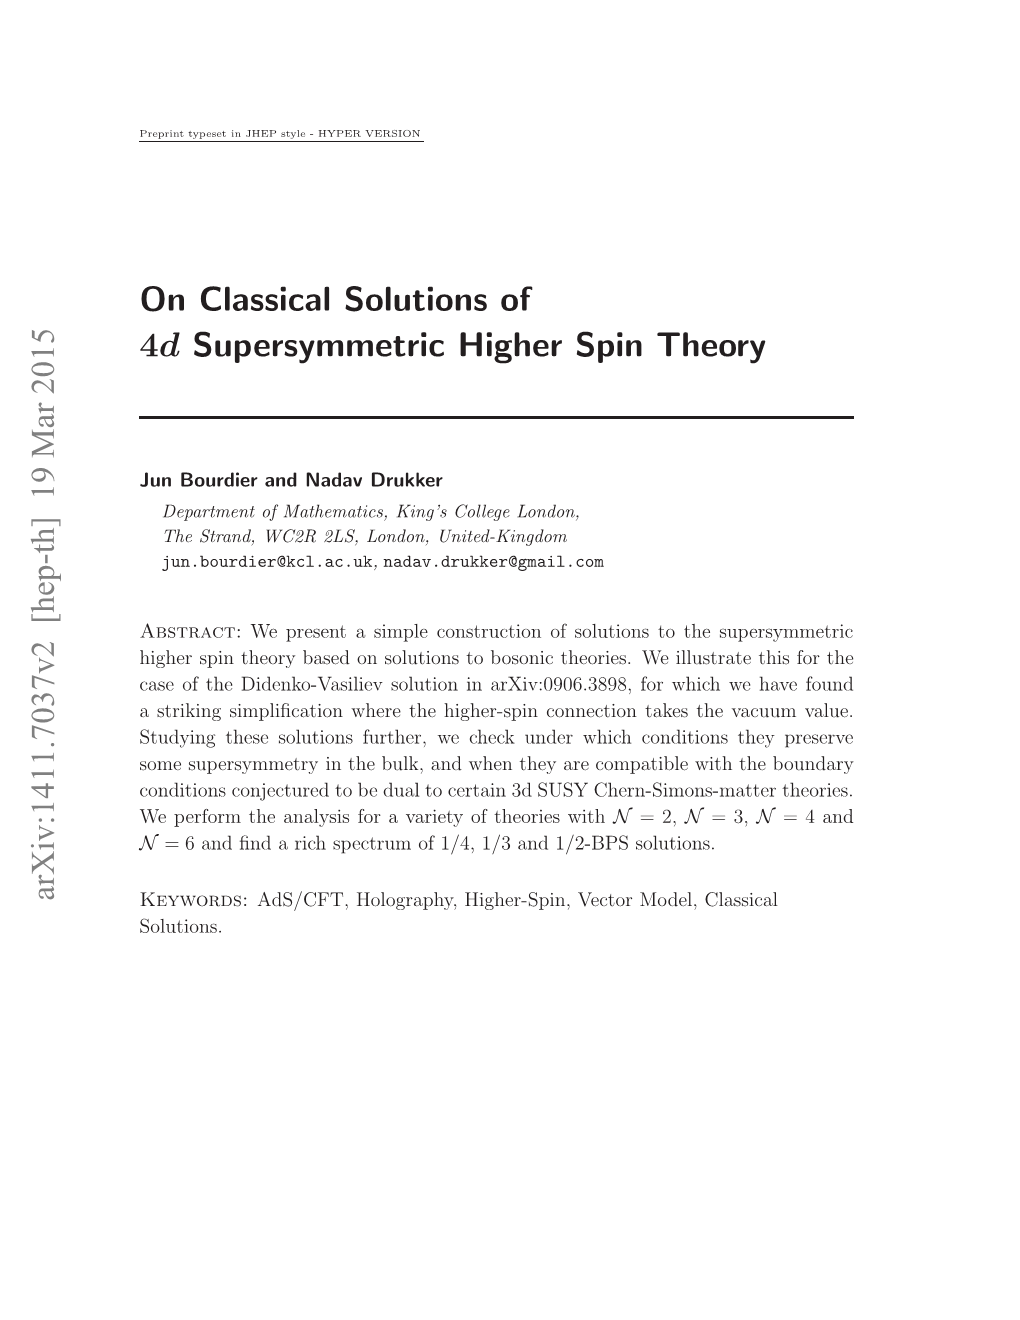 On Classical Solutions of 4D Supersymmetric Higher Spin Theory